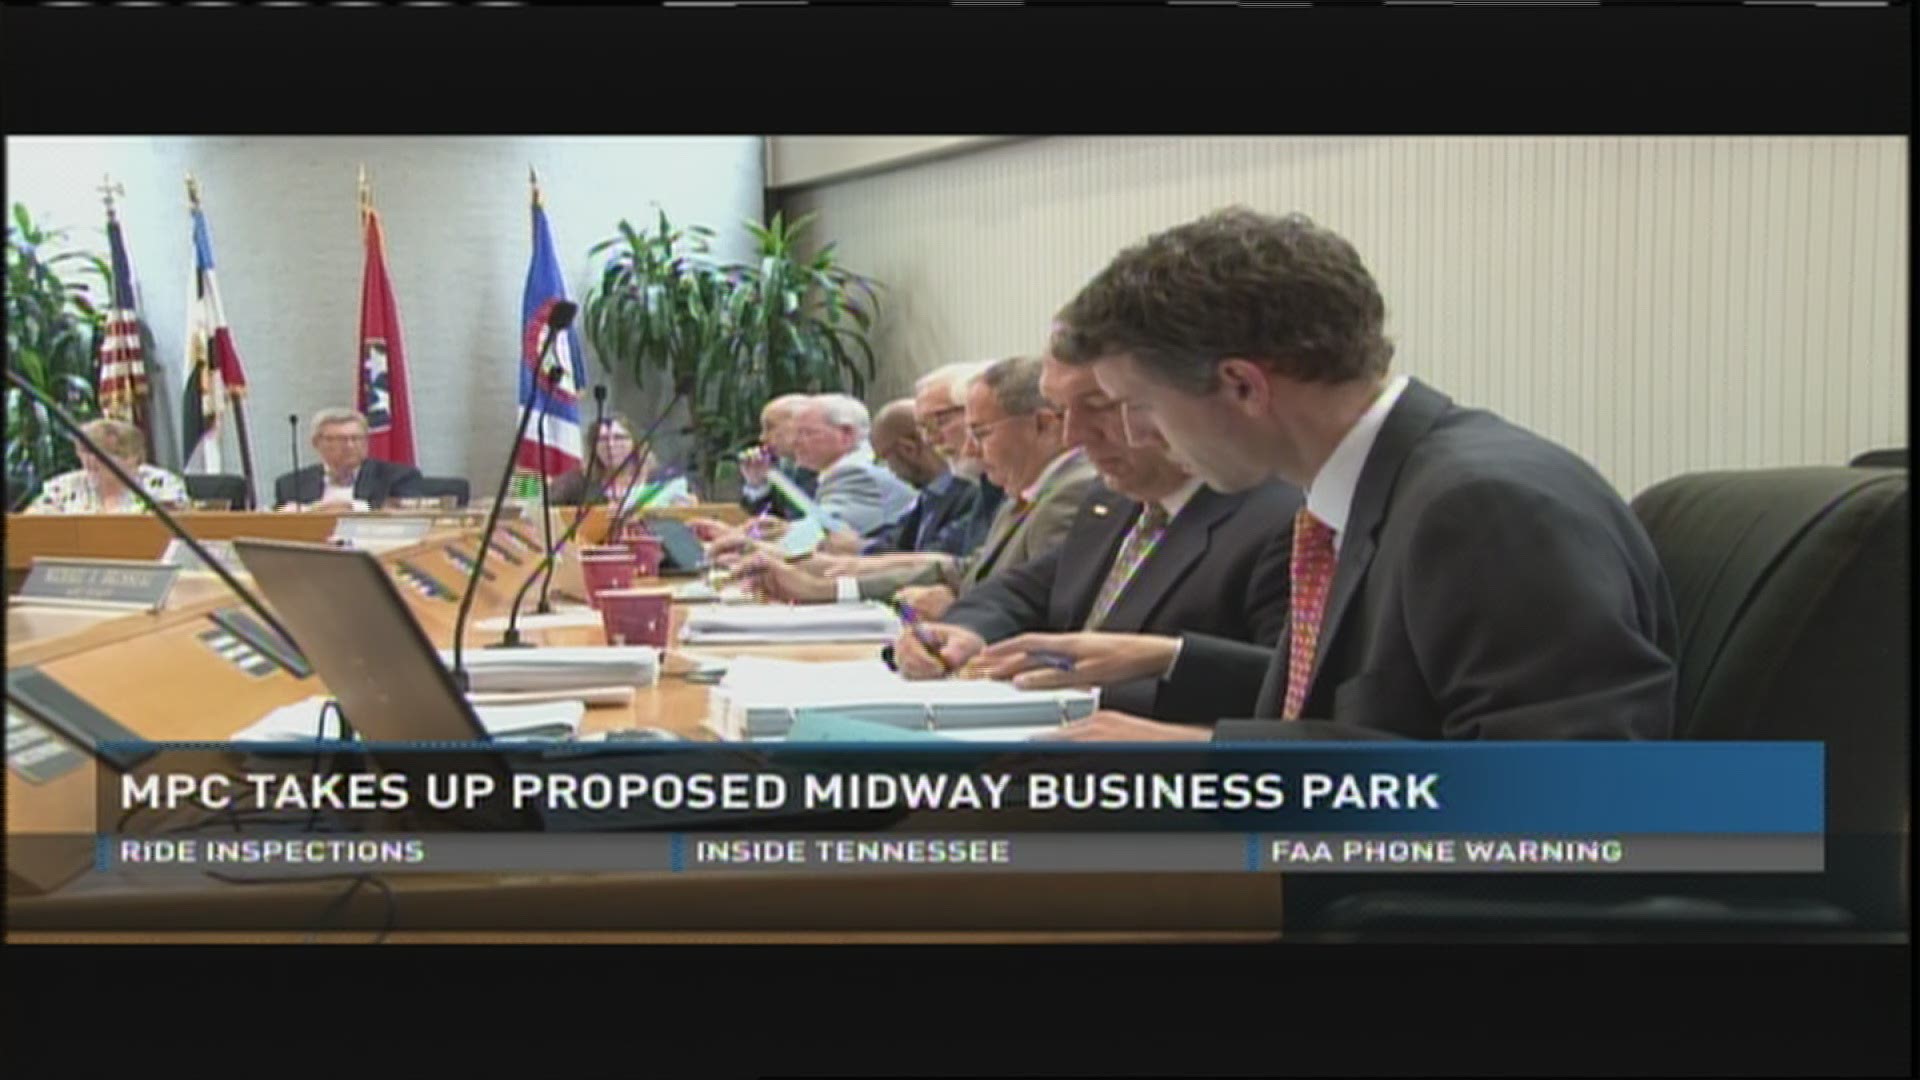 The Metropolitan Planning Commission voted 11-4 Thursday to move forward on the proposed Midway Business Park in East Knox County.